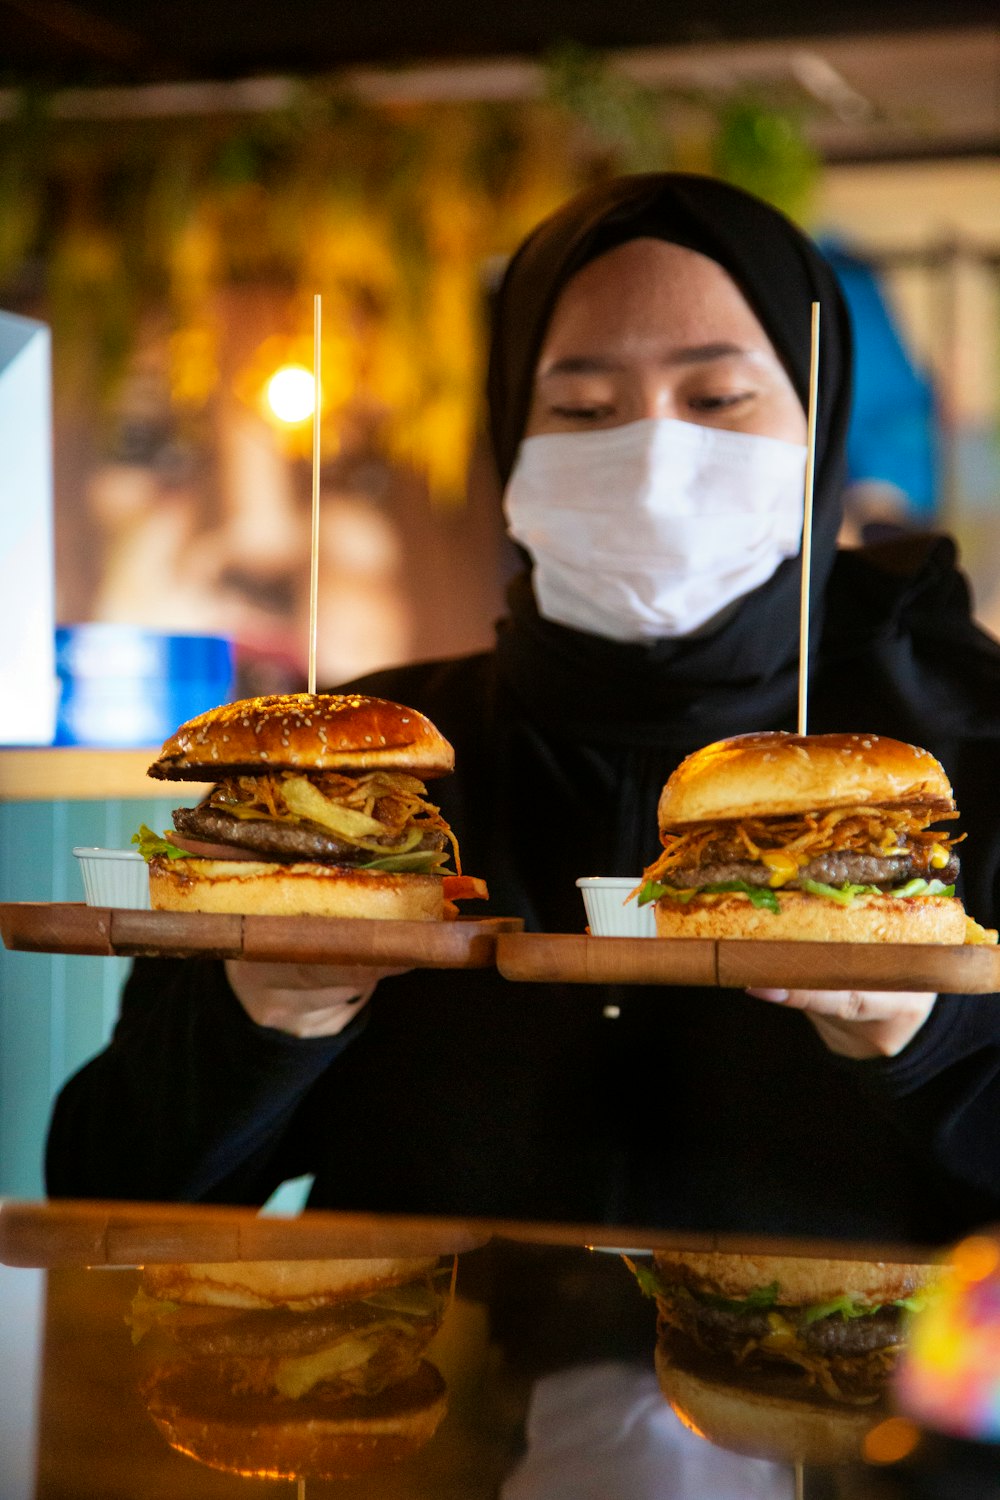 a woman wearing a face mask holding a tray of sandwiches